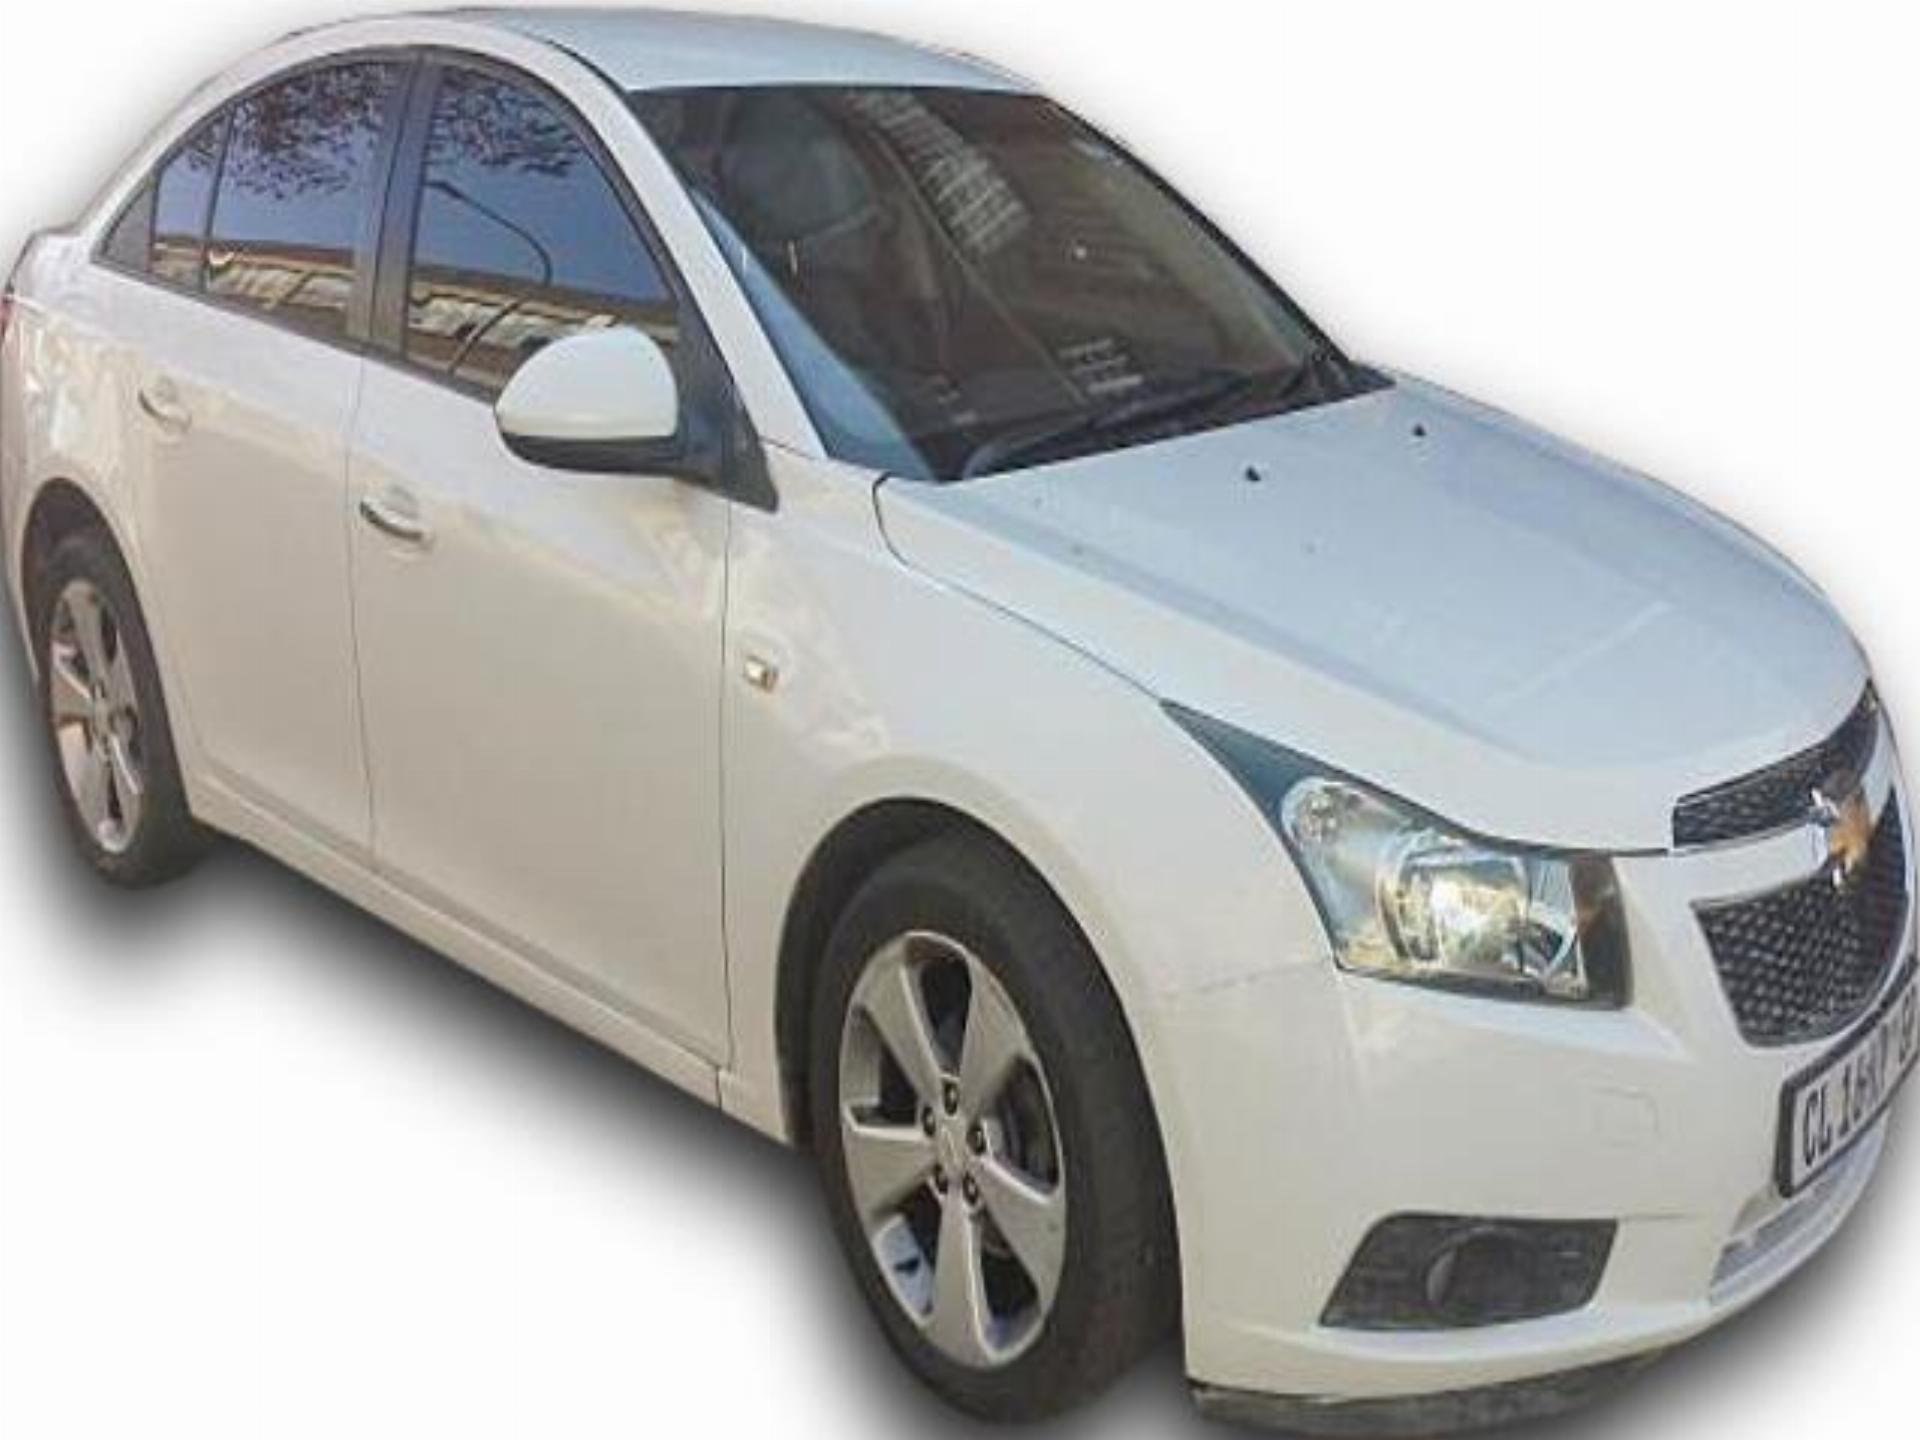 Used Chevrolet Cruze 1.8 2011 on auction PV1017505